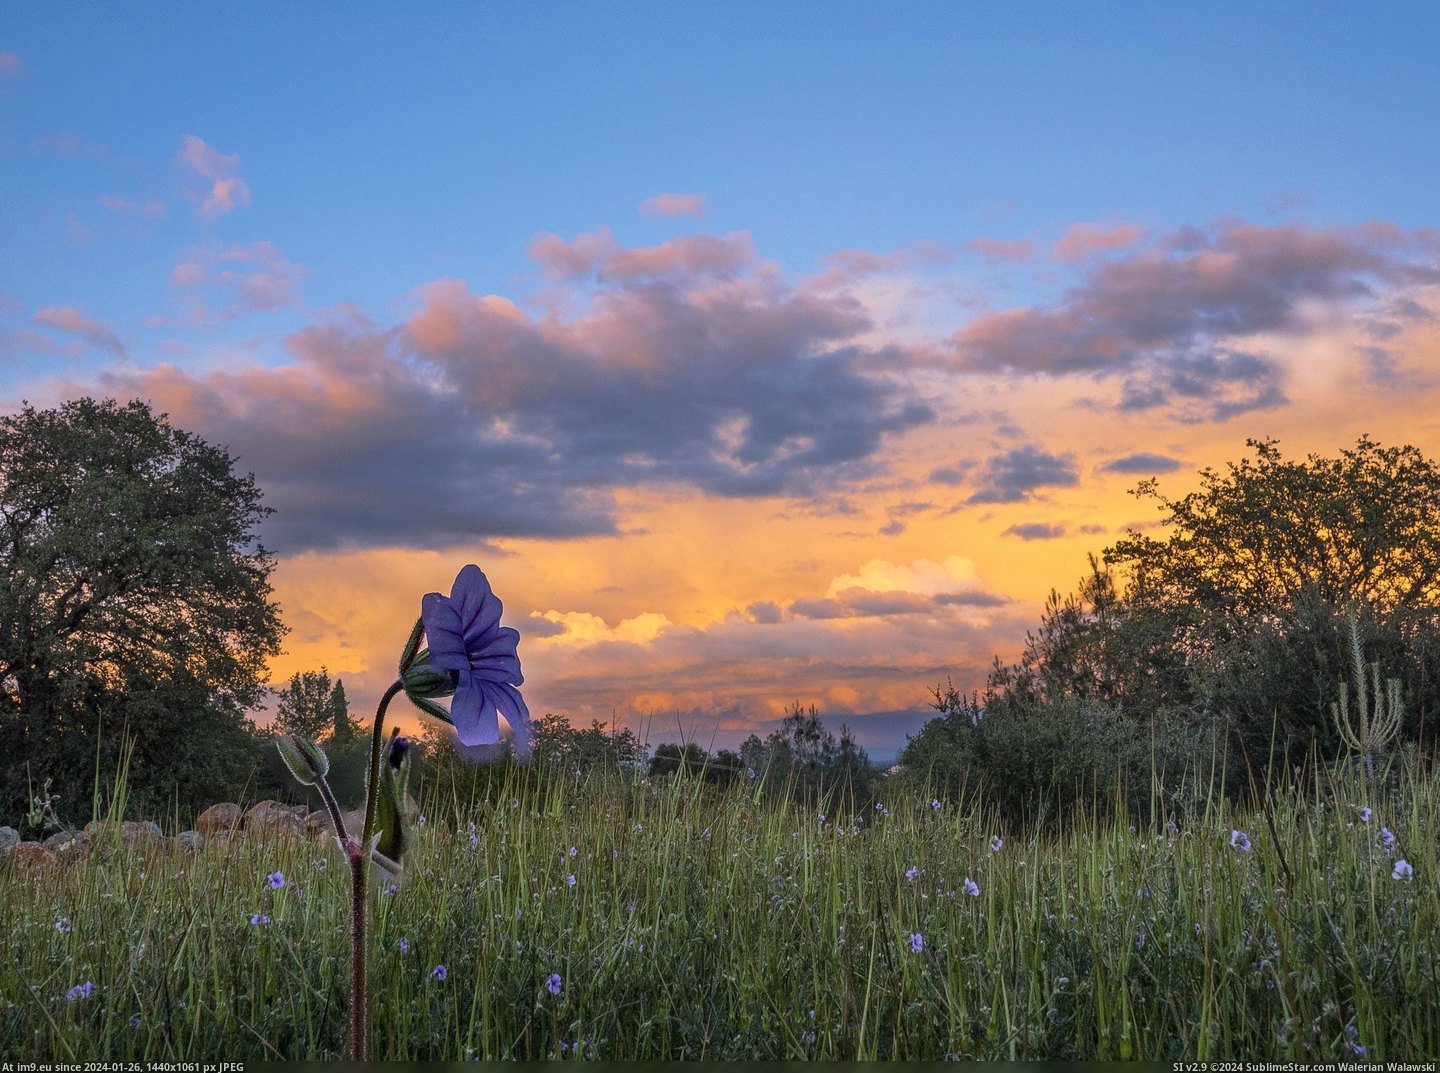 #California #Sunset #Storm #Evening #Redding #Flowers #Clouds [Earthporn] Storm clouds and flowers at sunset this evening in Redding California. [2712x2011] Pic. (Image of album My r/EARTHPORN favs))